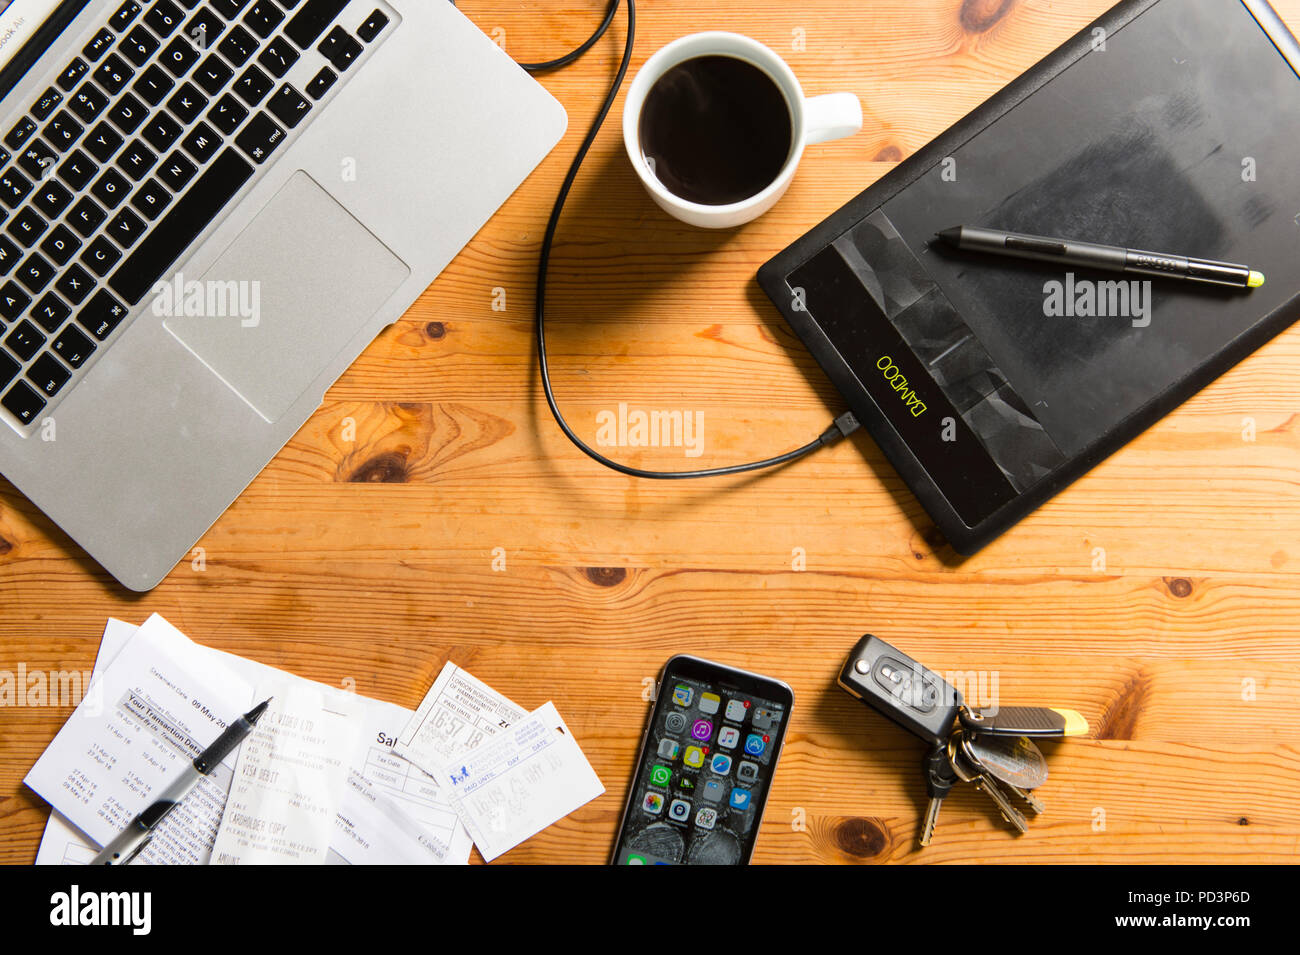 Top down view of macbook with coffee, receipts, keys, wacom tablet and  iphone Stock Photo - Alamy